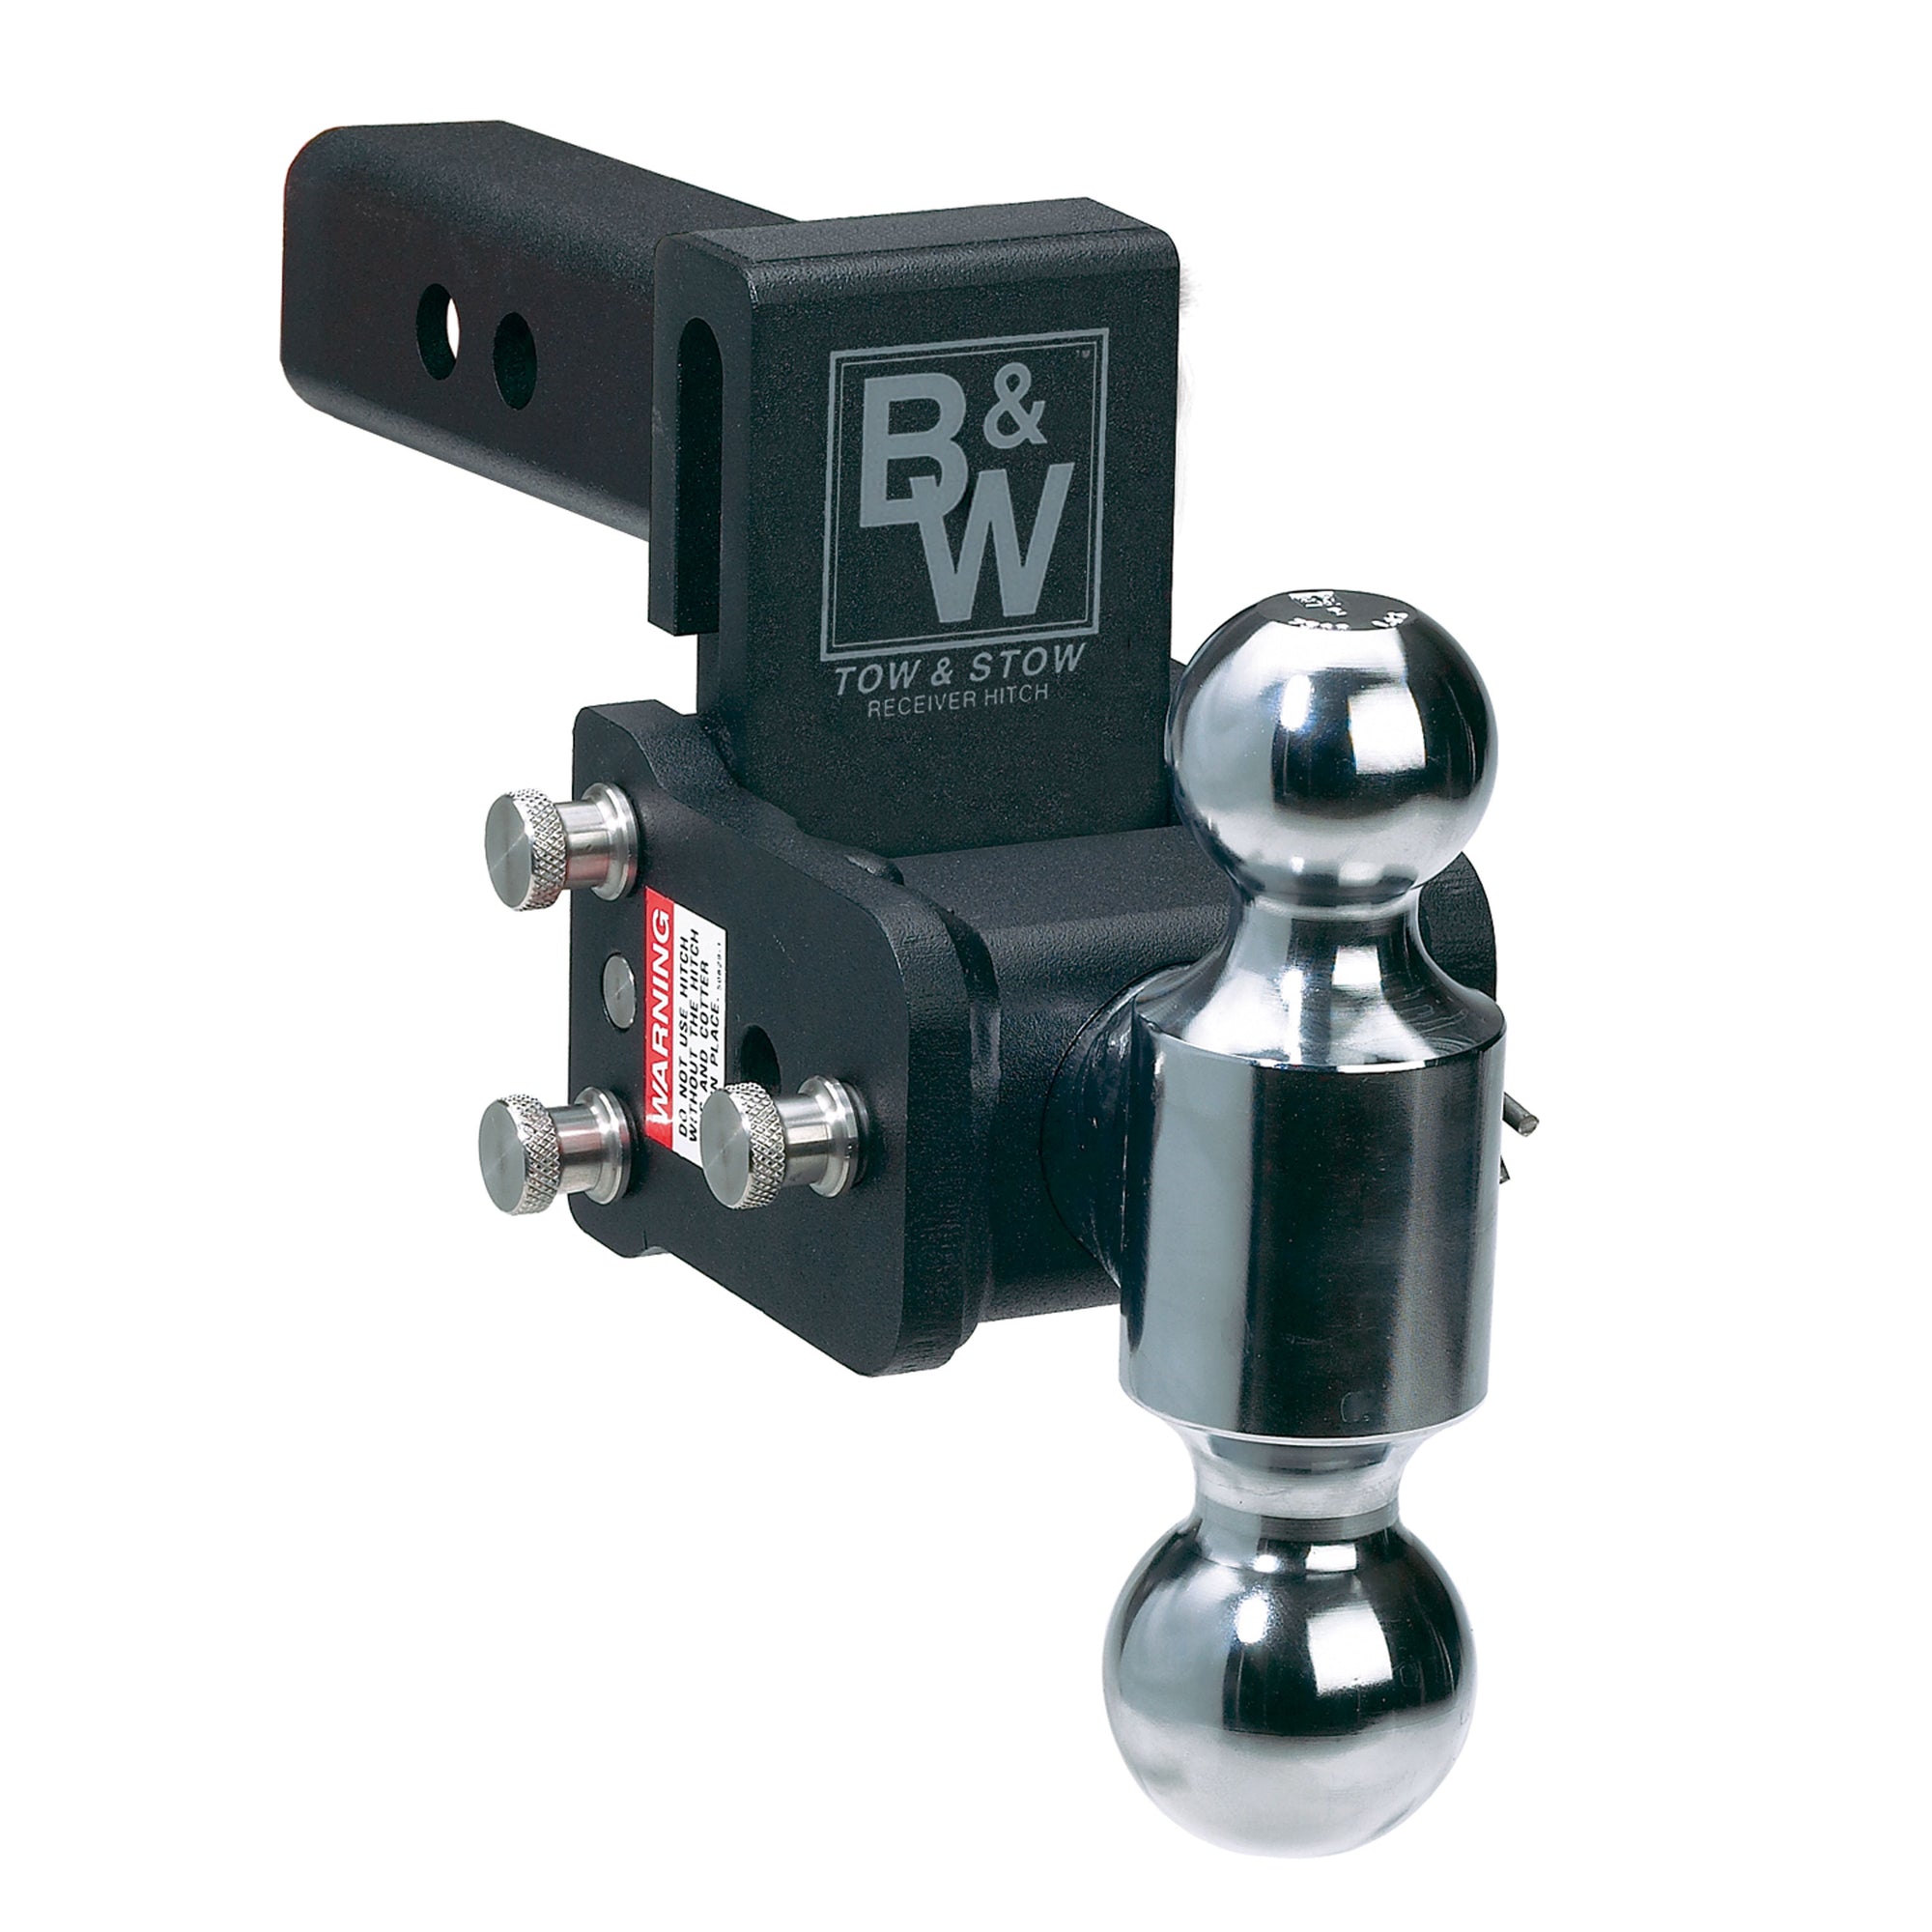 B&W Trailer Hitches TS10043B Tow and Stow Adjustable Ball Mount - 2-5/16" & 2" Ball, 9" Drop, 9.5" Rise, Black